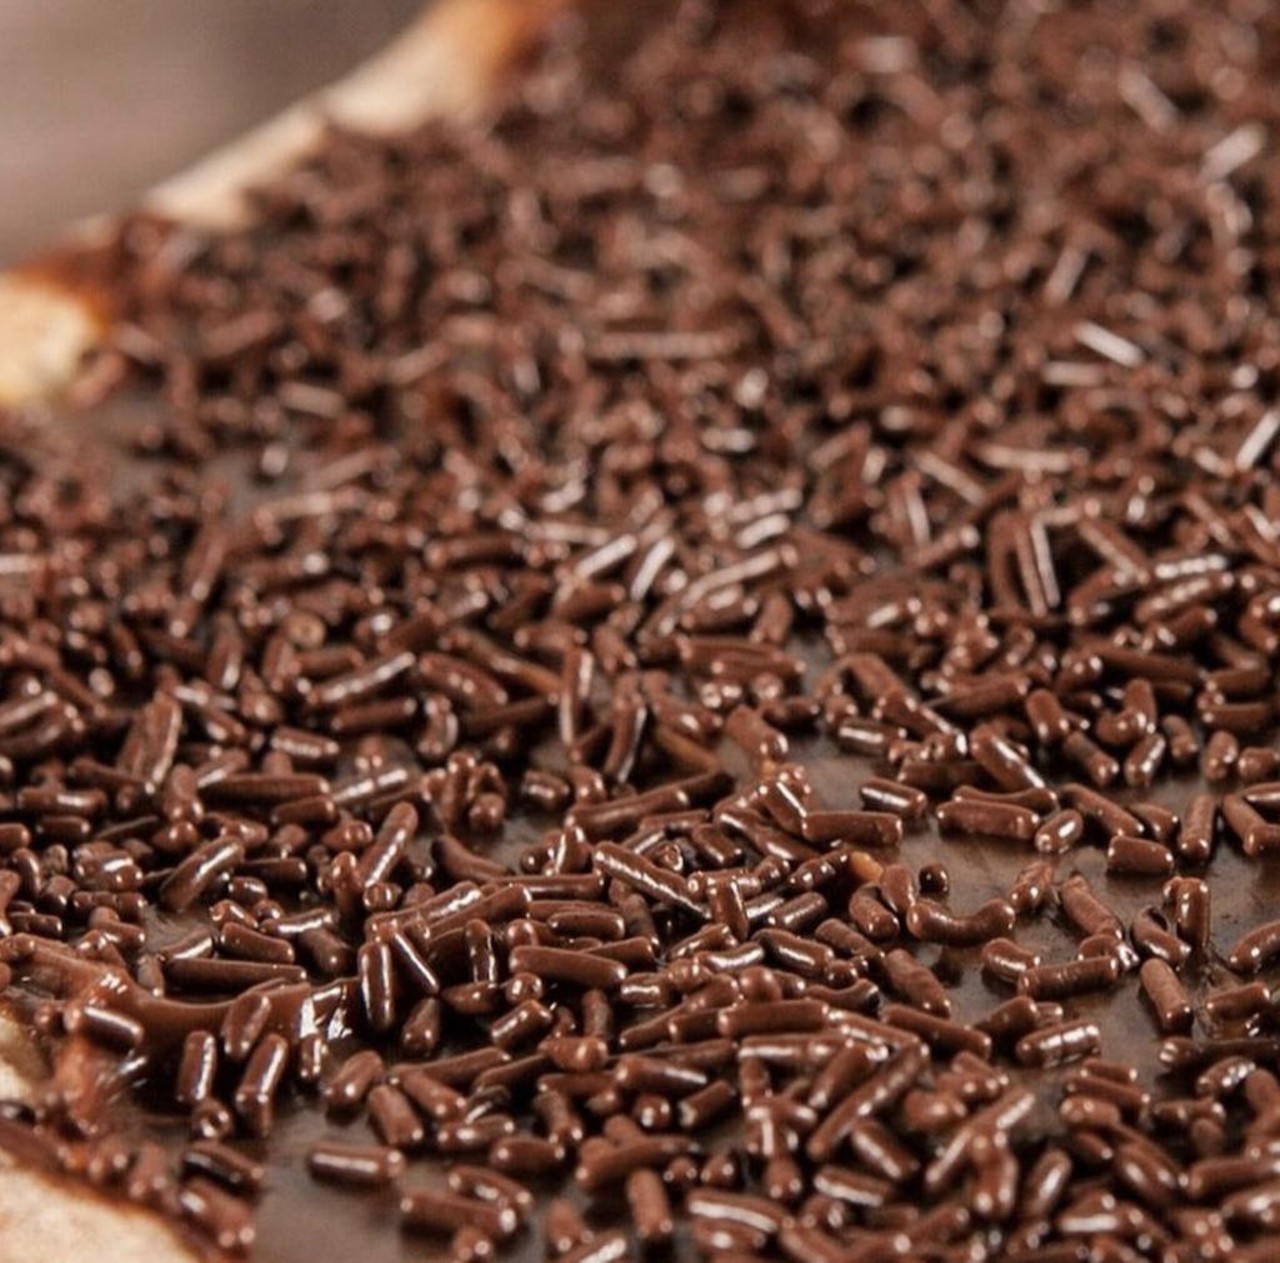 The Brigadeiro PizzaPiefection, 3120 S. Kirkman Road
Pizza doesn&#146;t always have to be a meal; it can be dessert too. Brigadeiro, a Brazilian sweet made of condensed milk and cocoa powder, is perfect on a pizza to satisfy a sweet tooth.
Photo via Pie-Fection/Instagram